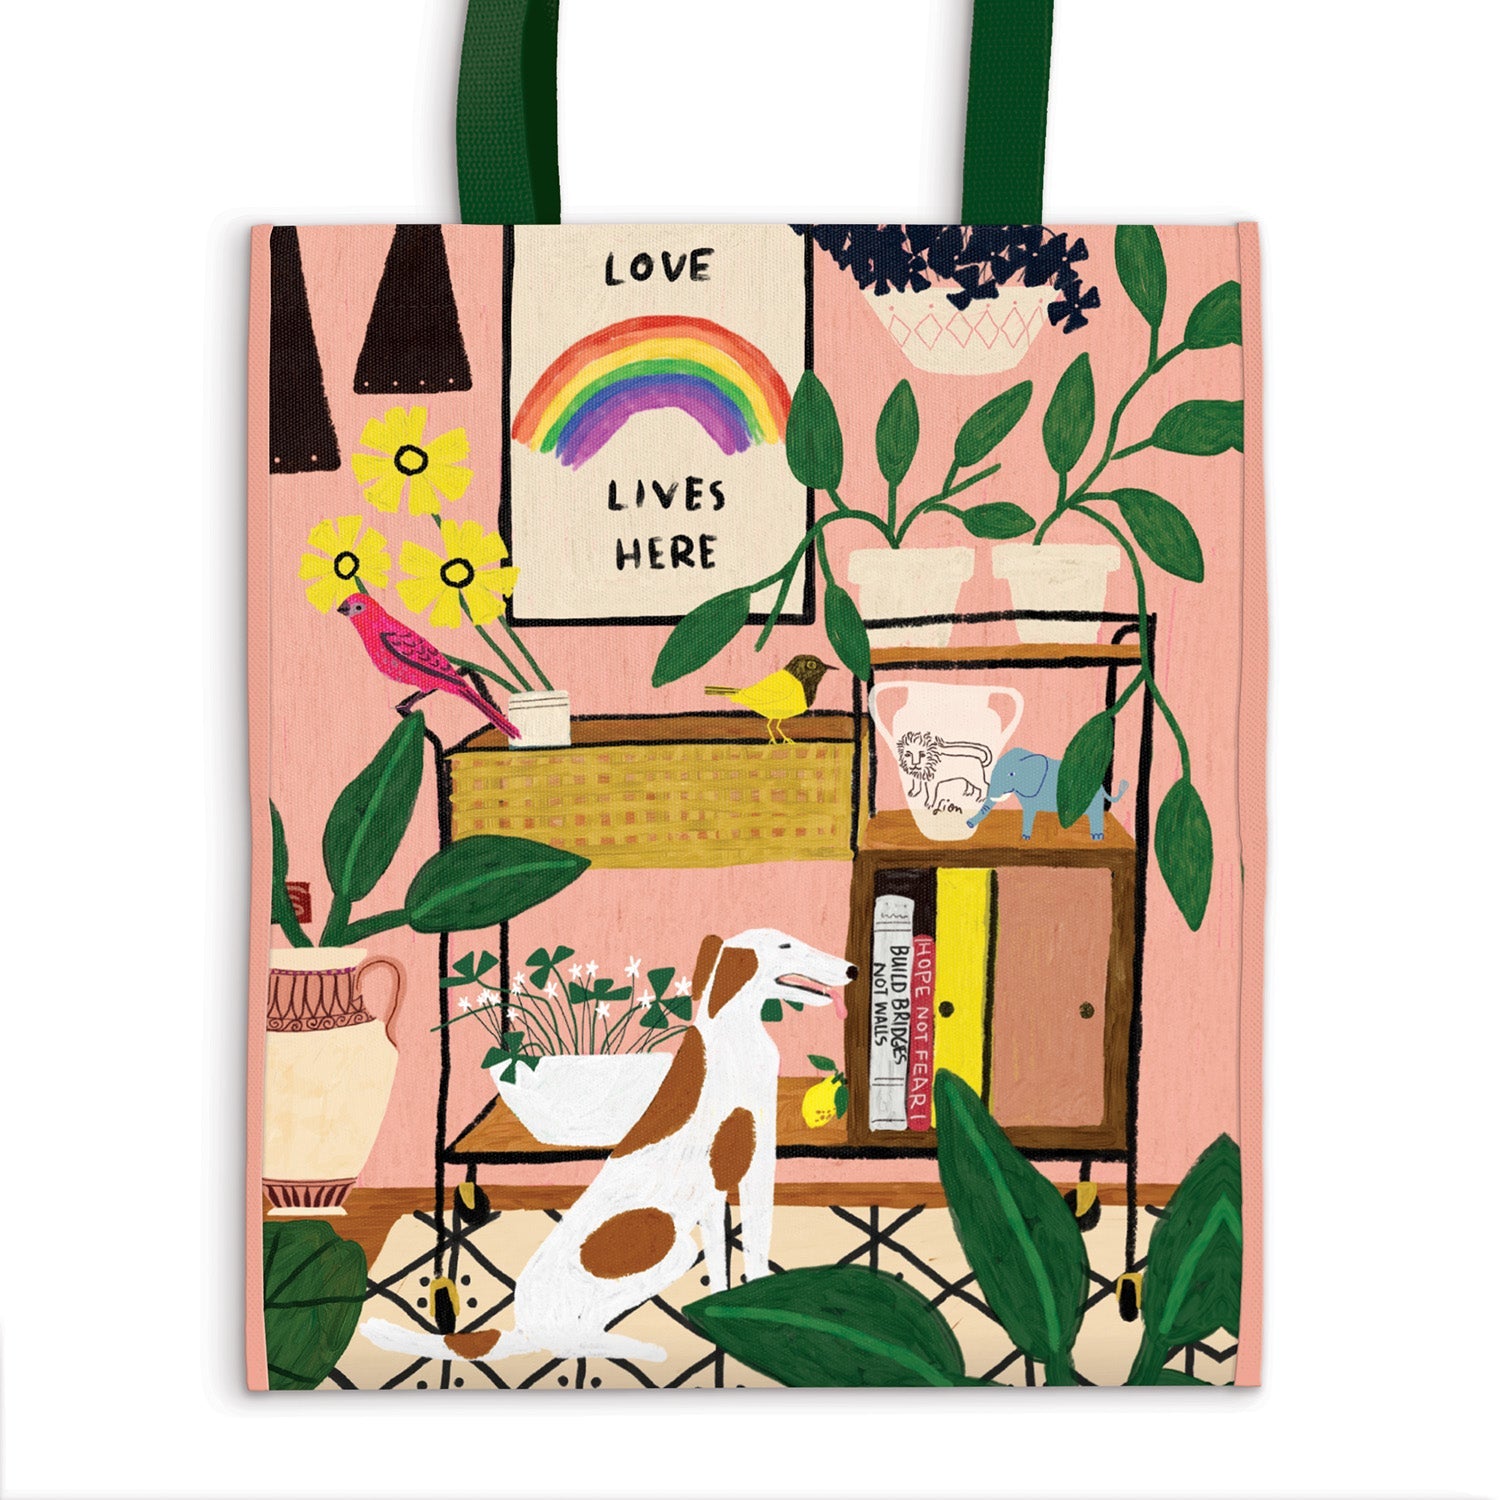 The Love Medium Tote - Canvas by KULE | Os